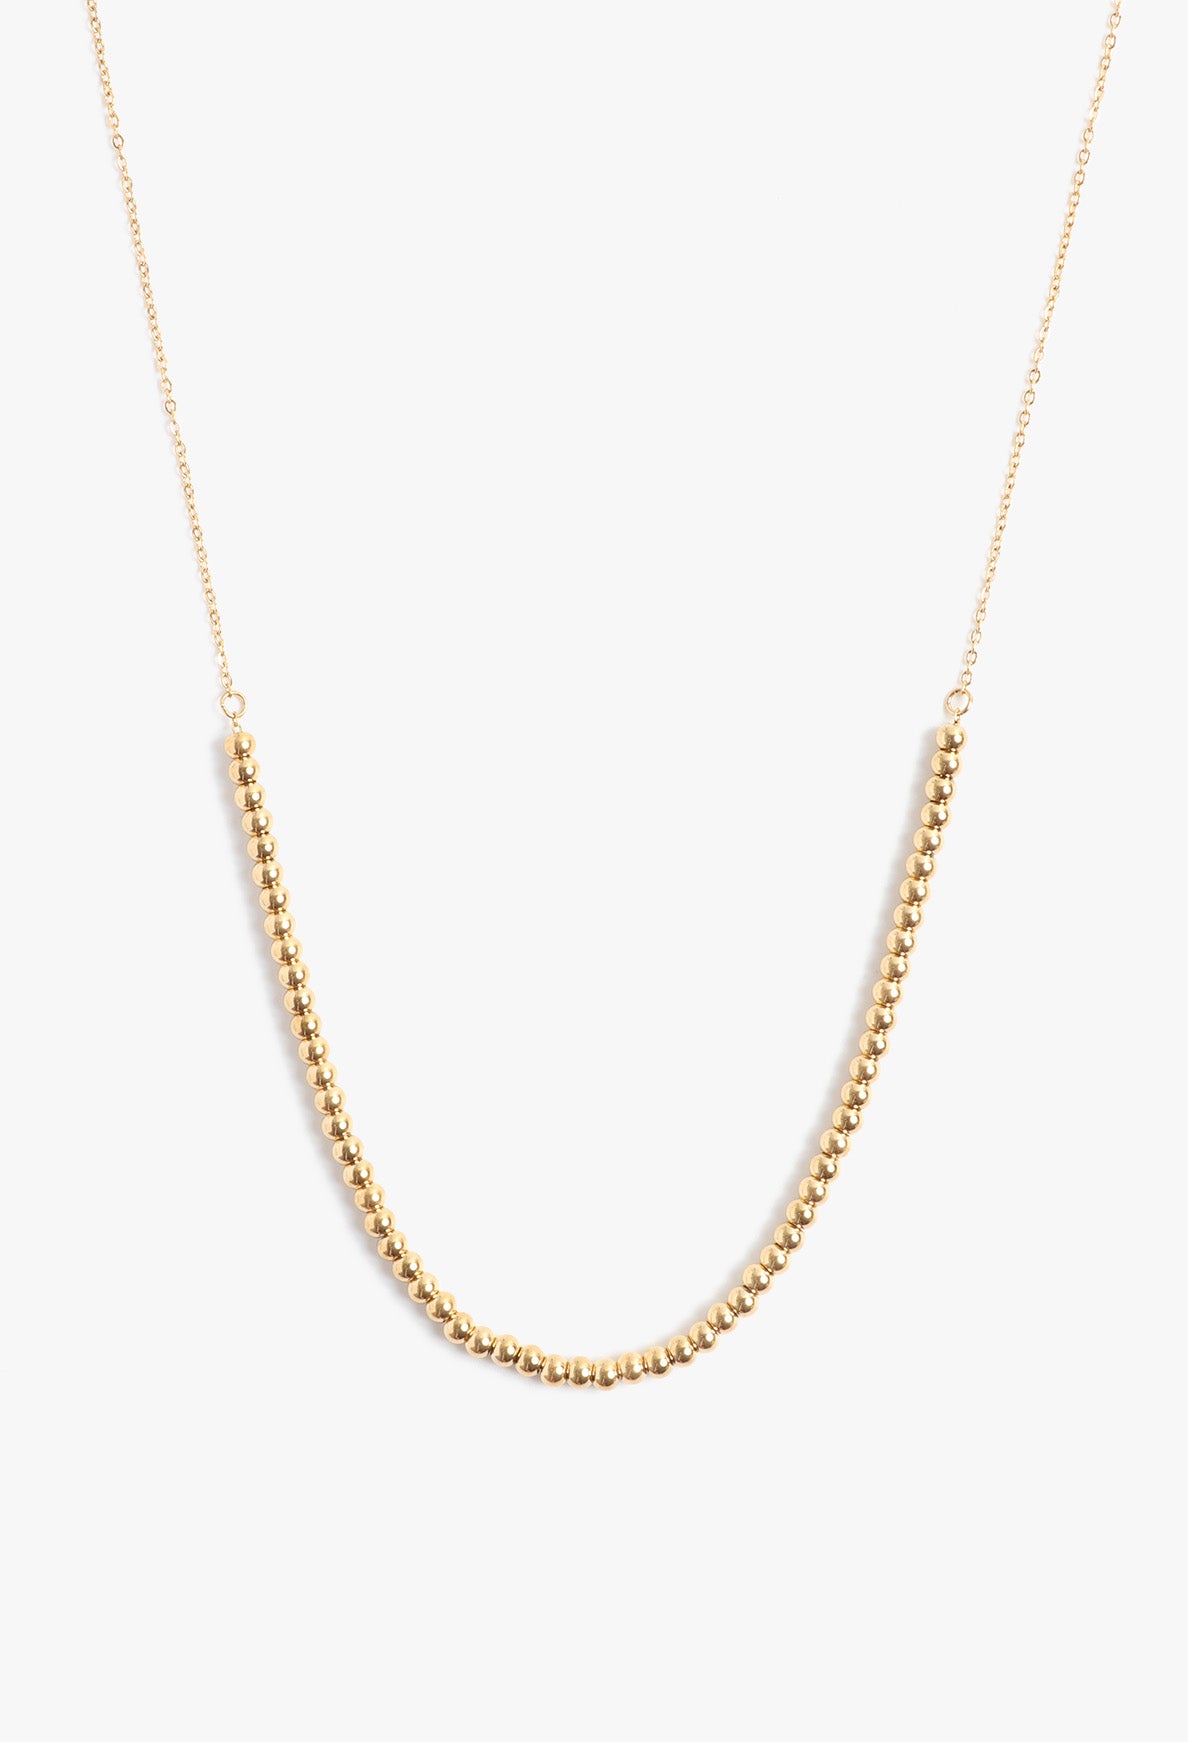 Marrin Costello Jewelry Crown Chain dainty dot necklace with lobster clasp closure and extender. Waterproof, sustainable, hypoallergenic. 14k gold plated stainless steel.